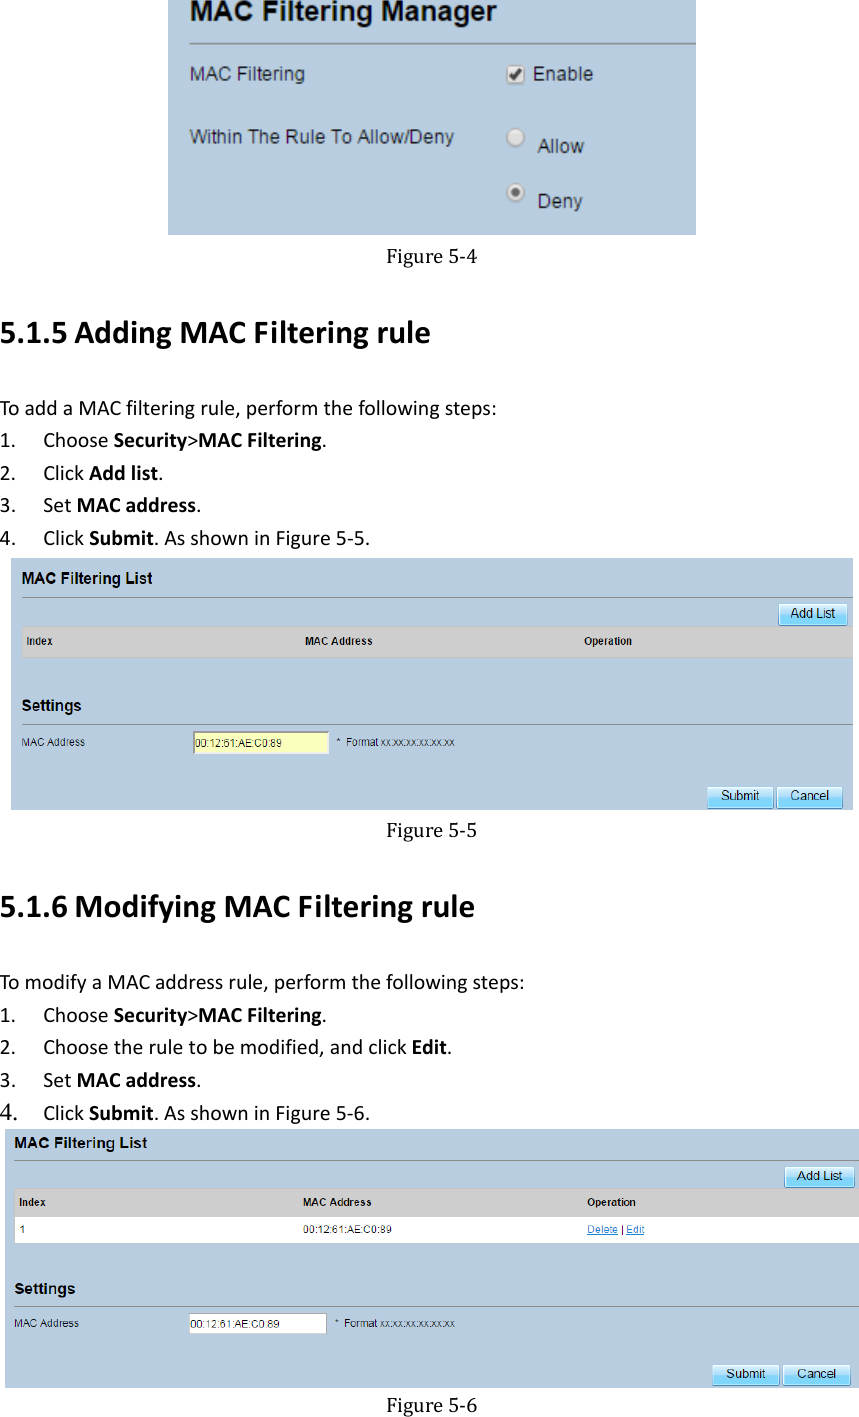    Figure5‐45.1.5 AddingMACFilteringruleToaddaMACfilteringrule,performthefollowingsteps:1. ChooseSecurity&gt;MACFiltering.2. ClickAddlist.3. SetMACaddress.4. ClickSubmit.AsshowninFigure5‐5. Figure5‐55.1.6 ModifyingMACFilteringruleTomodifyaMACaddressrule,performthefollowingsteps:1. ChooseSecurity&gt;MACFiltering.2. Choosetheruletobemodified,andclickEdit.3. SetMACaddress.4. ClickSubmit.AsshowninFigure5‐6.  Figure5‐6